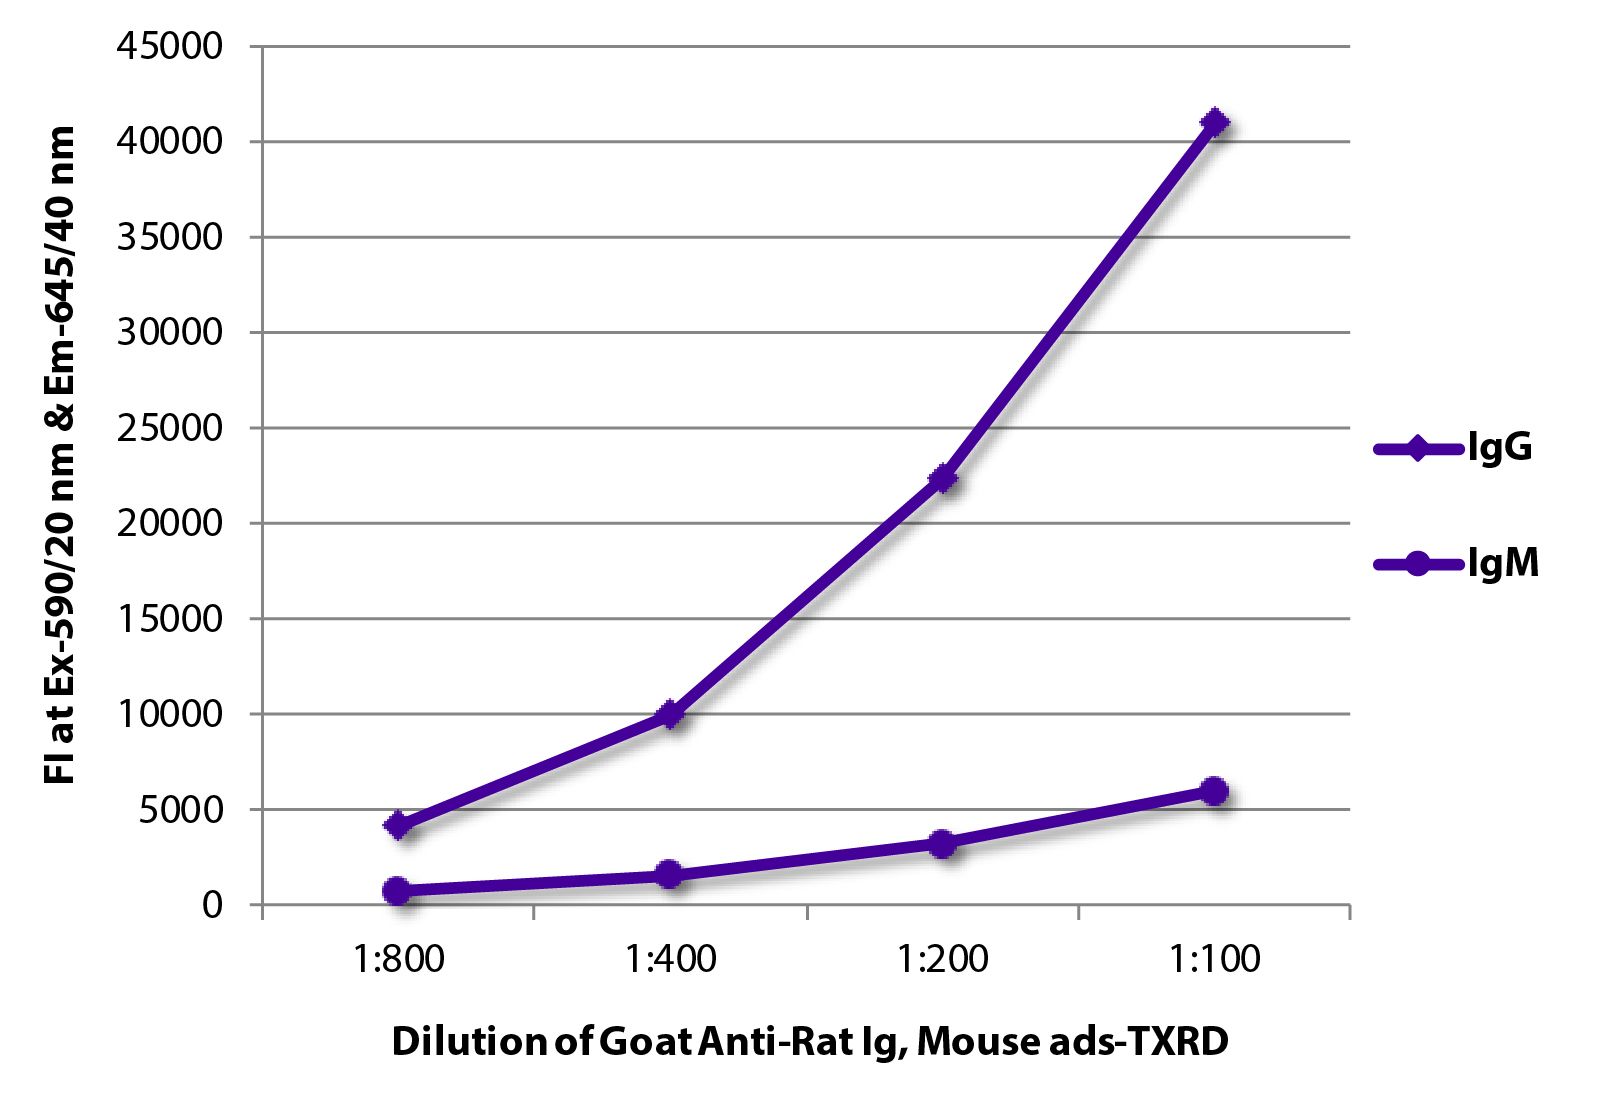 FLISA plate was coated with purified rat IgG and IgM.  Immunoglobulins were detected with serially diluted Goat Anti-Rat Ig, Mouse ads-TXRD (SB Cat. No. 3010-07).